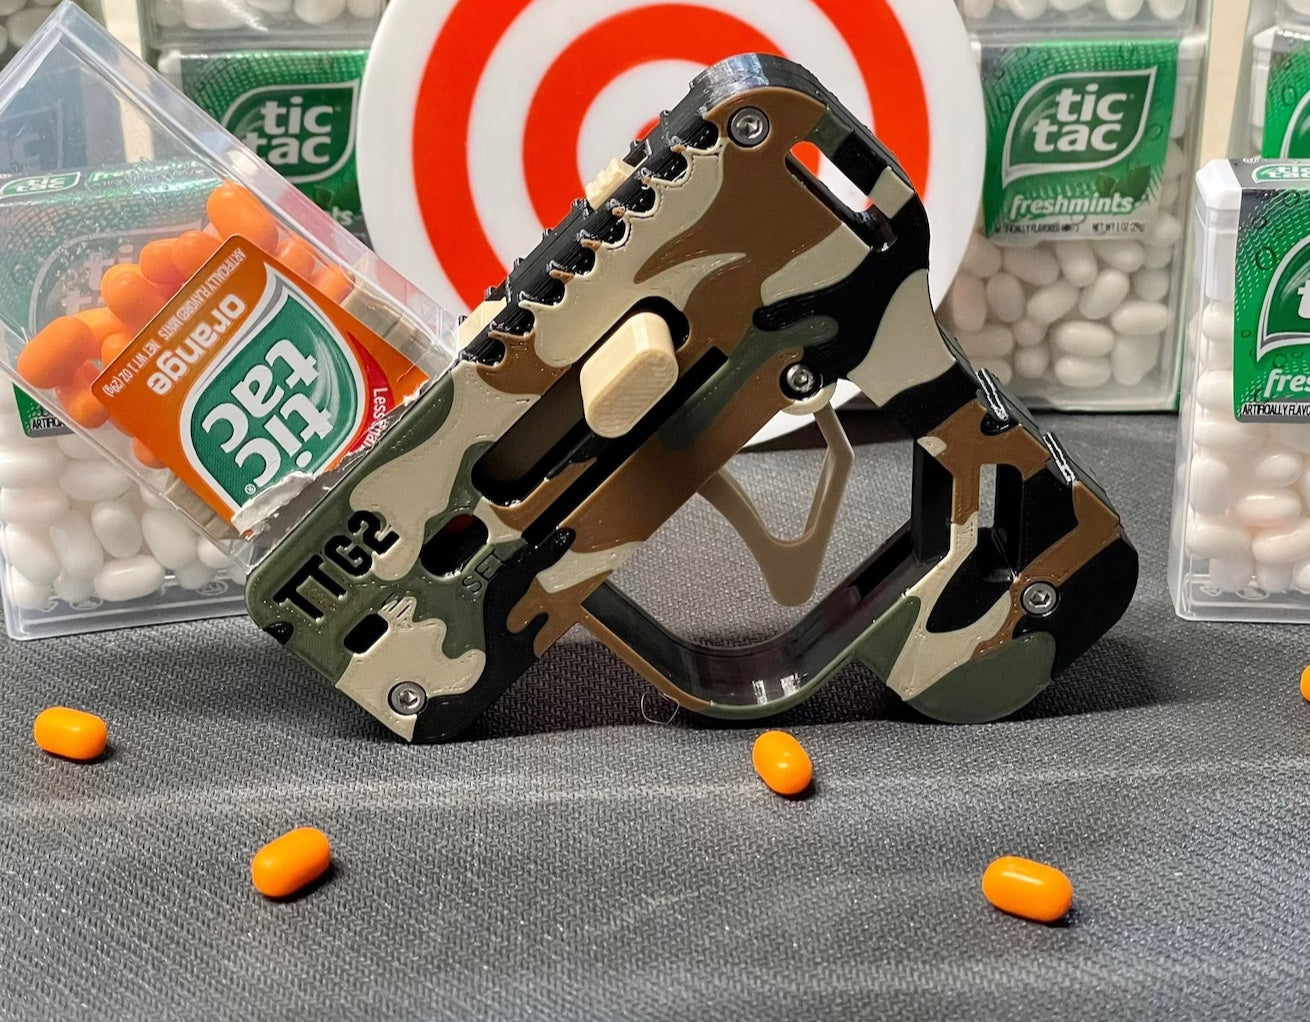 The Weirdest Tech Products You Never Knew You Needed: Featuring a gun that fires Tic Tacs